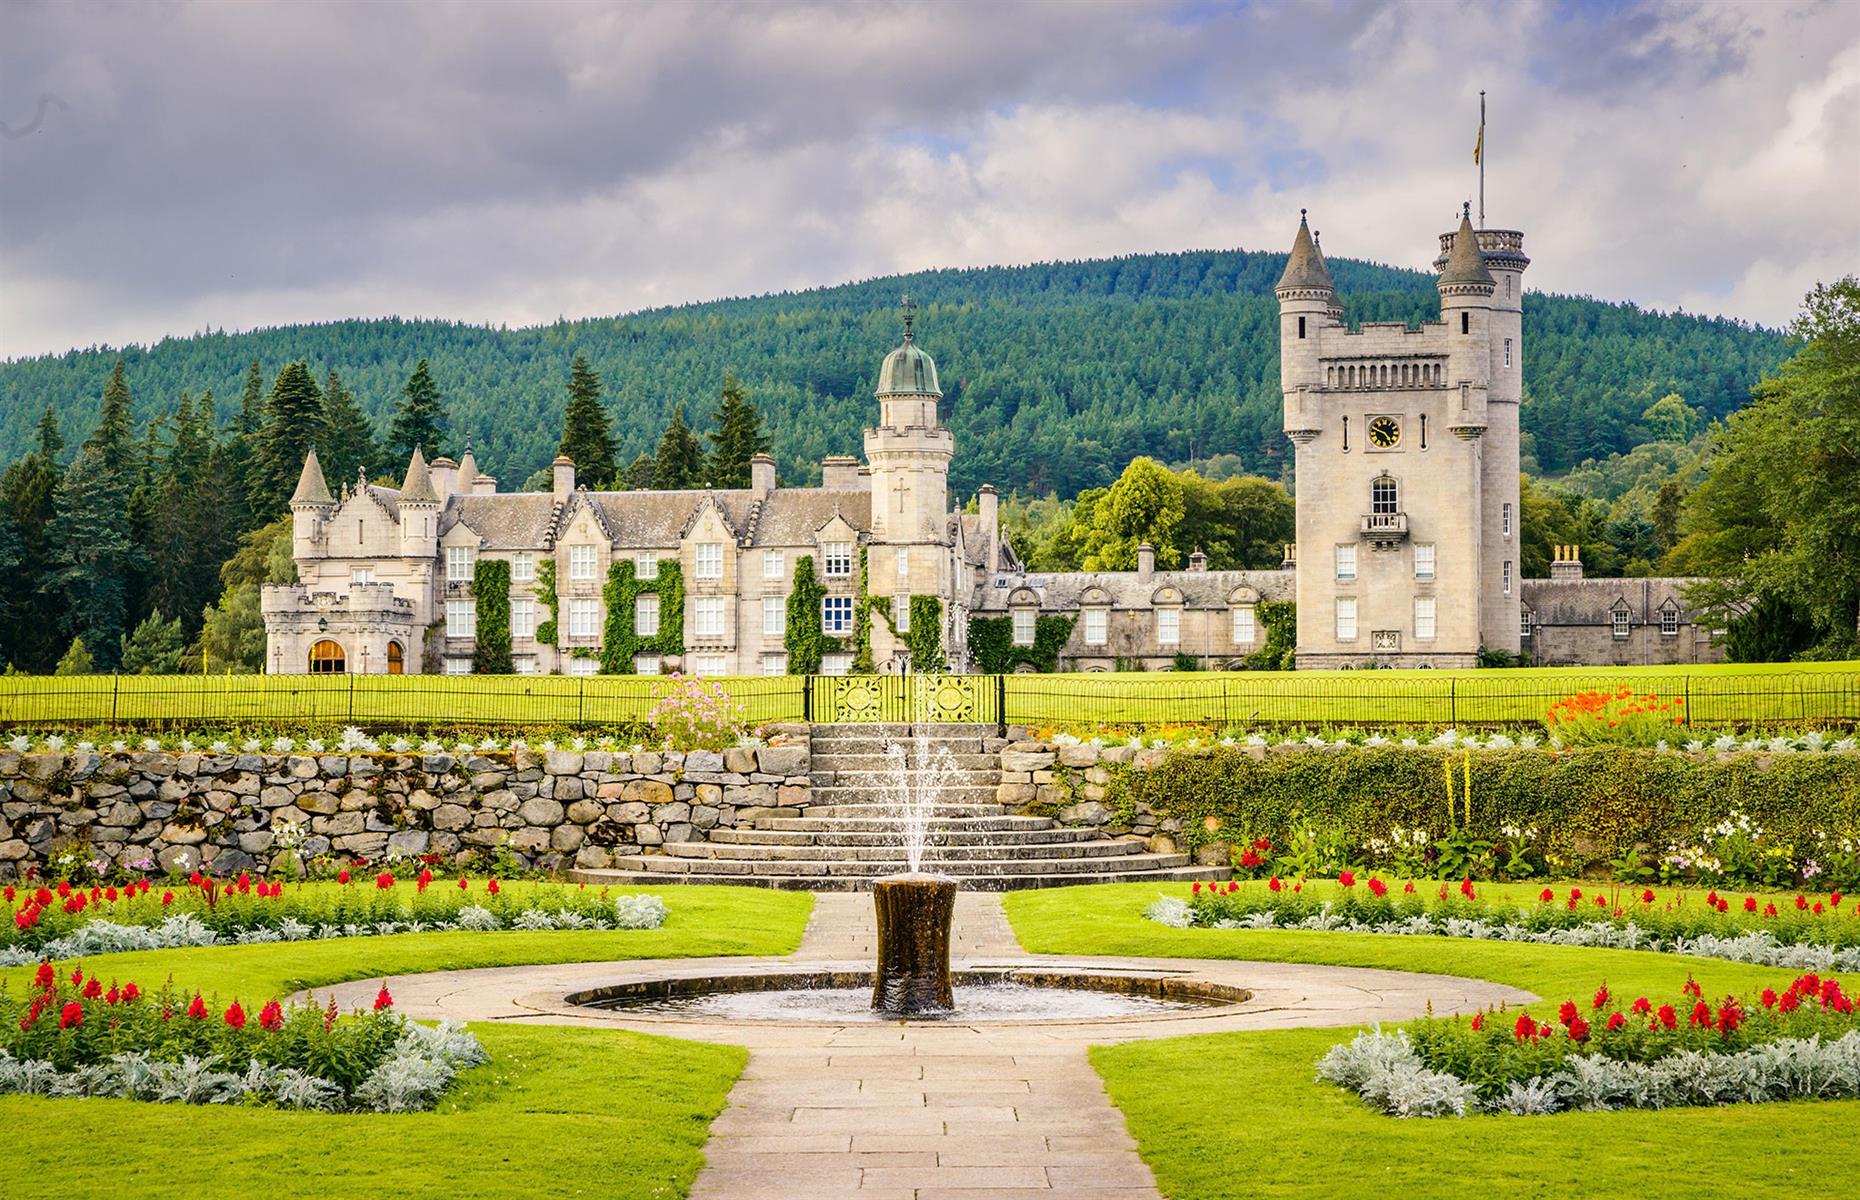 <p>It's no secret that Queen Victoria fell head over heels (or should that be head over hills?) for the Scottish Highlands, and so her husband Albert had Balmoral built for her. Today, <a href="https://www.balmoralcastle.com/">Balmoral</a> is still a holiday home for the British royal family, who spend every summer here, and it is without a doubt the best located of all the royal palaces in terms of scenery.</p>  <p><a href="https://www.loveexploring.com/galleries/141418/astounding-royal-residences-you-can-actually-visit?page=1"><strong>Here are more incredible royal residences you can visit</strong></a></p>